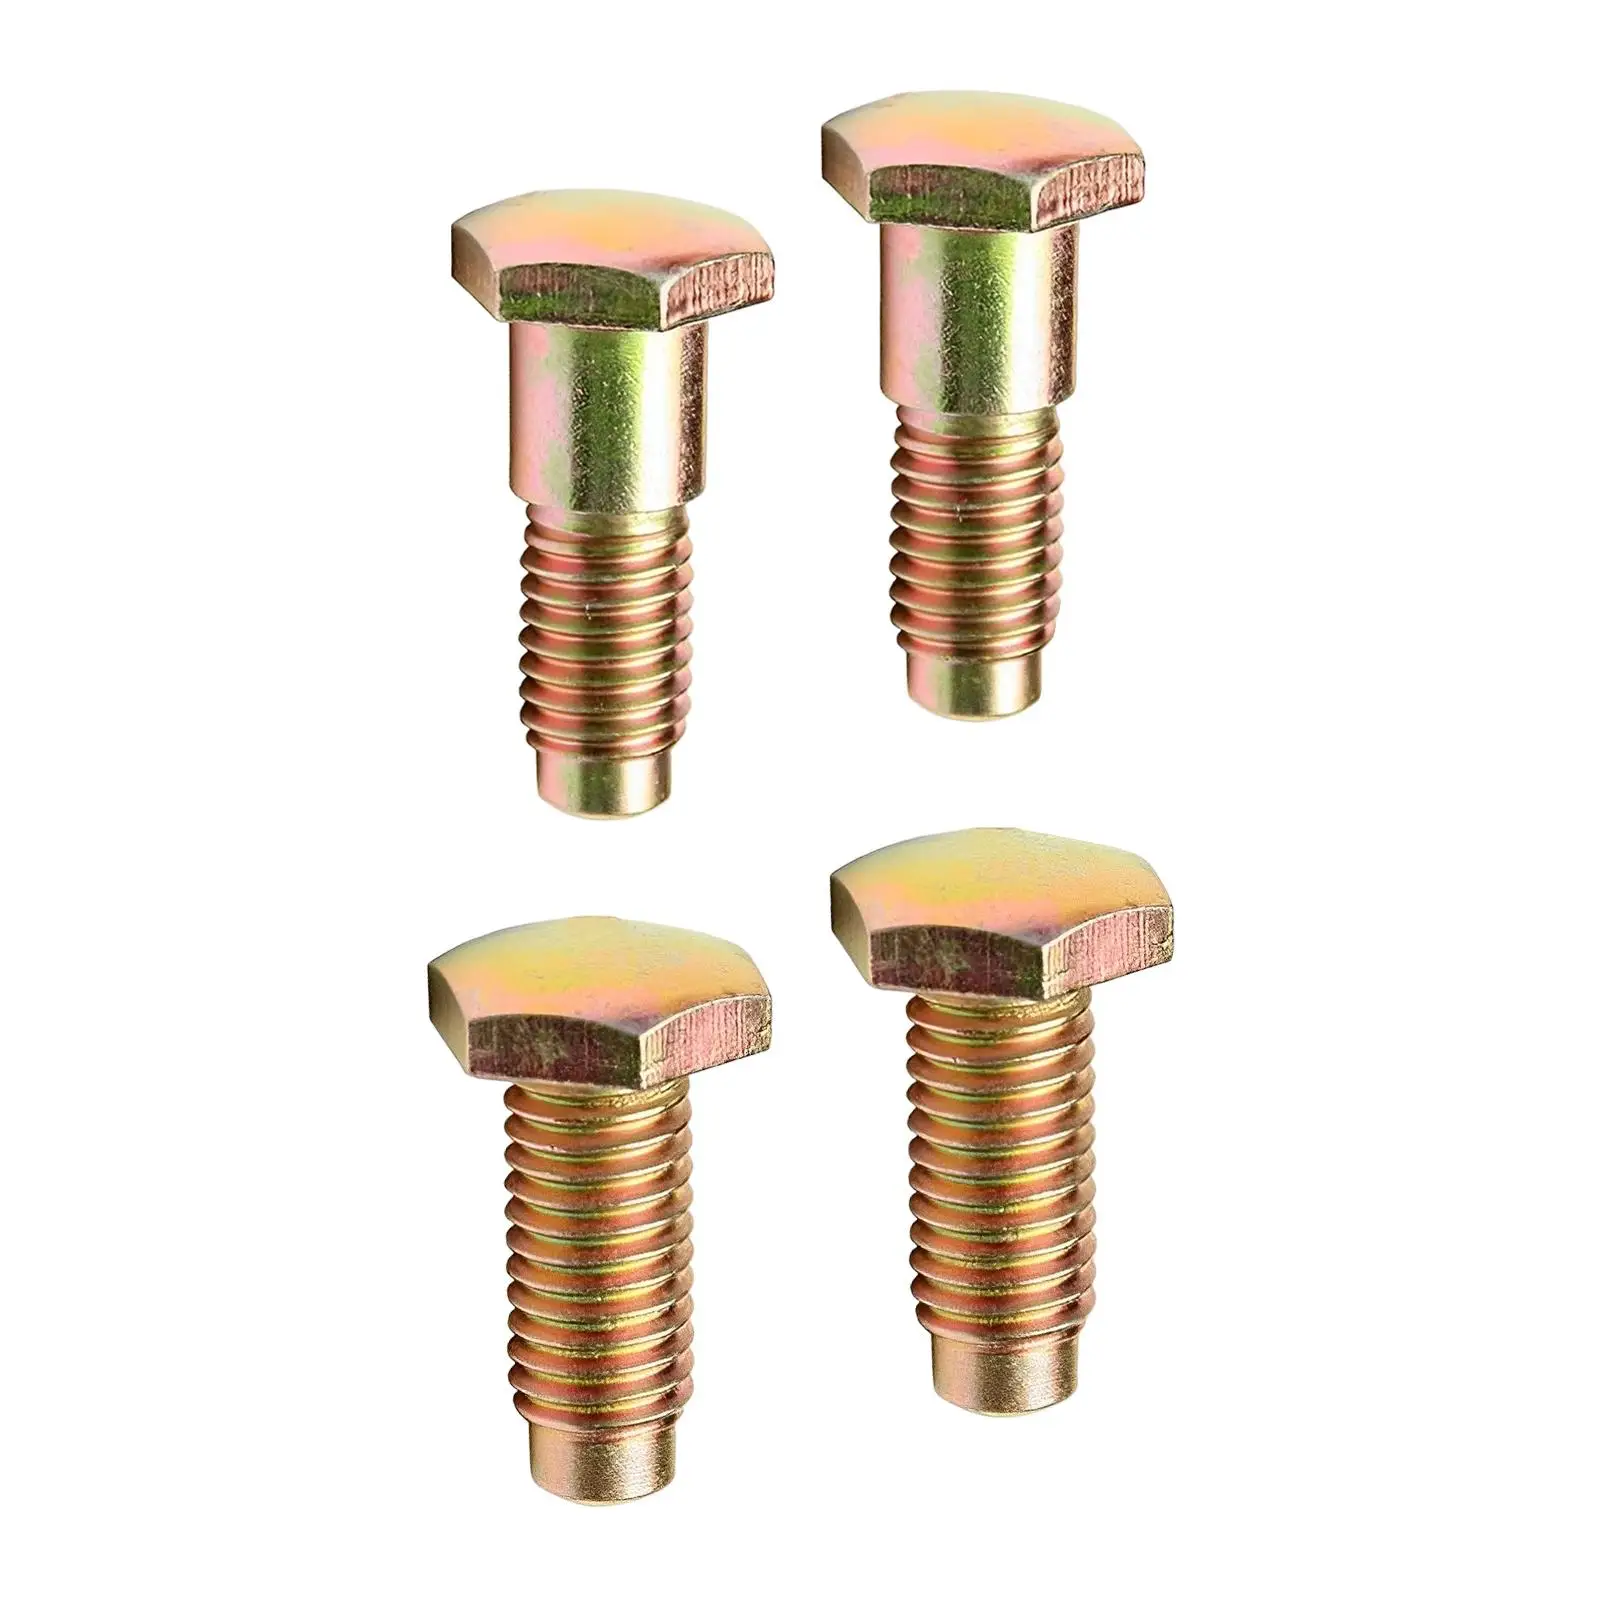 4Pcs Seat Belt Bolts Metal High Performance Car Accessories, Durable Spare Parts , Long and Short Bolts